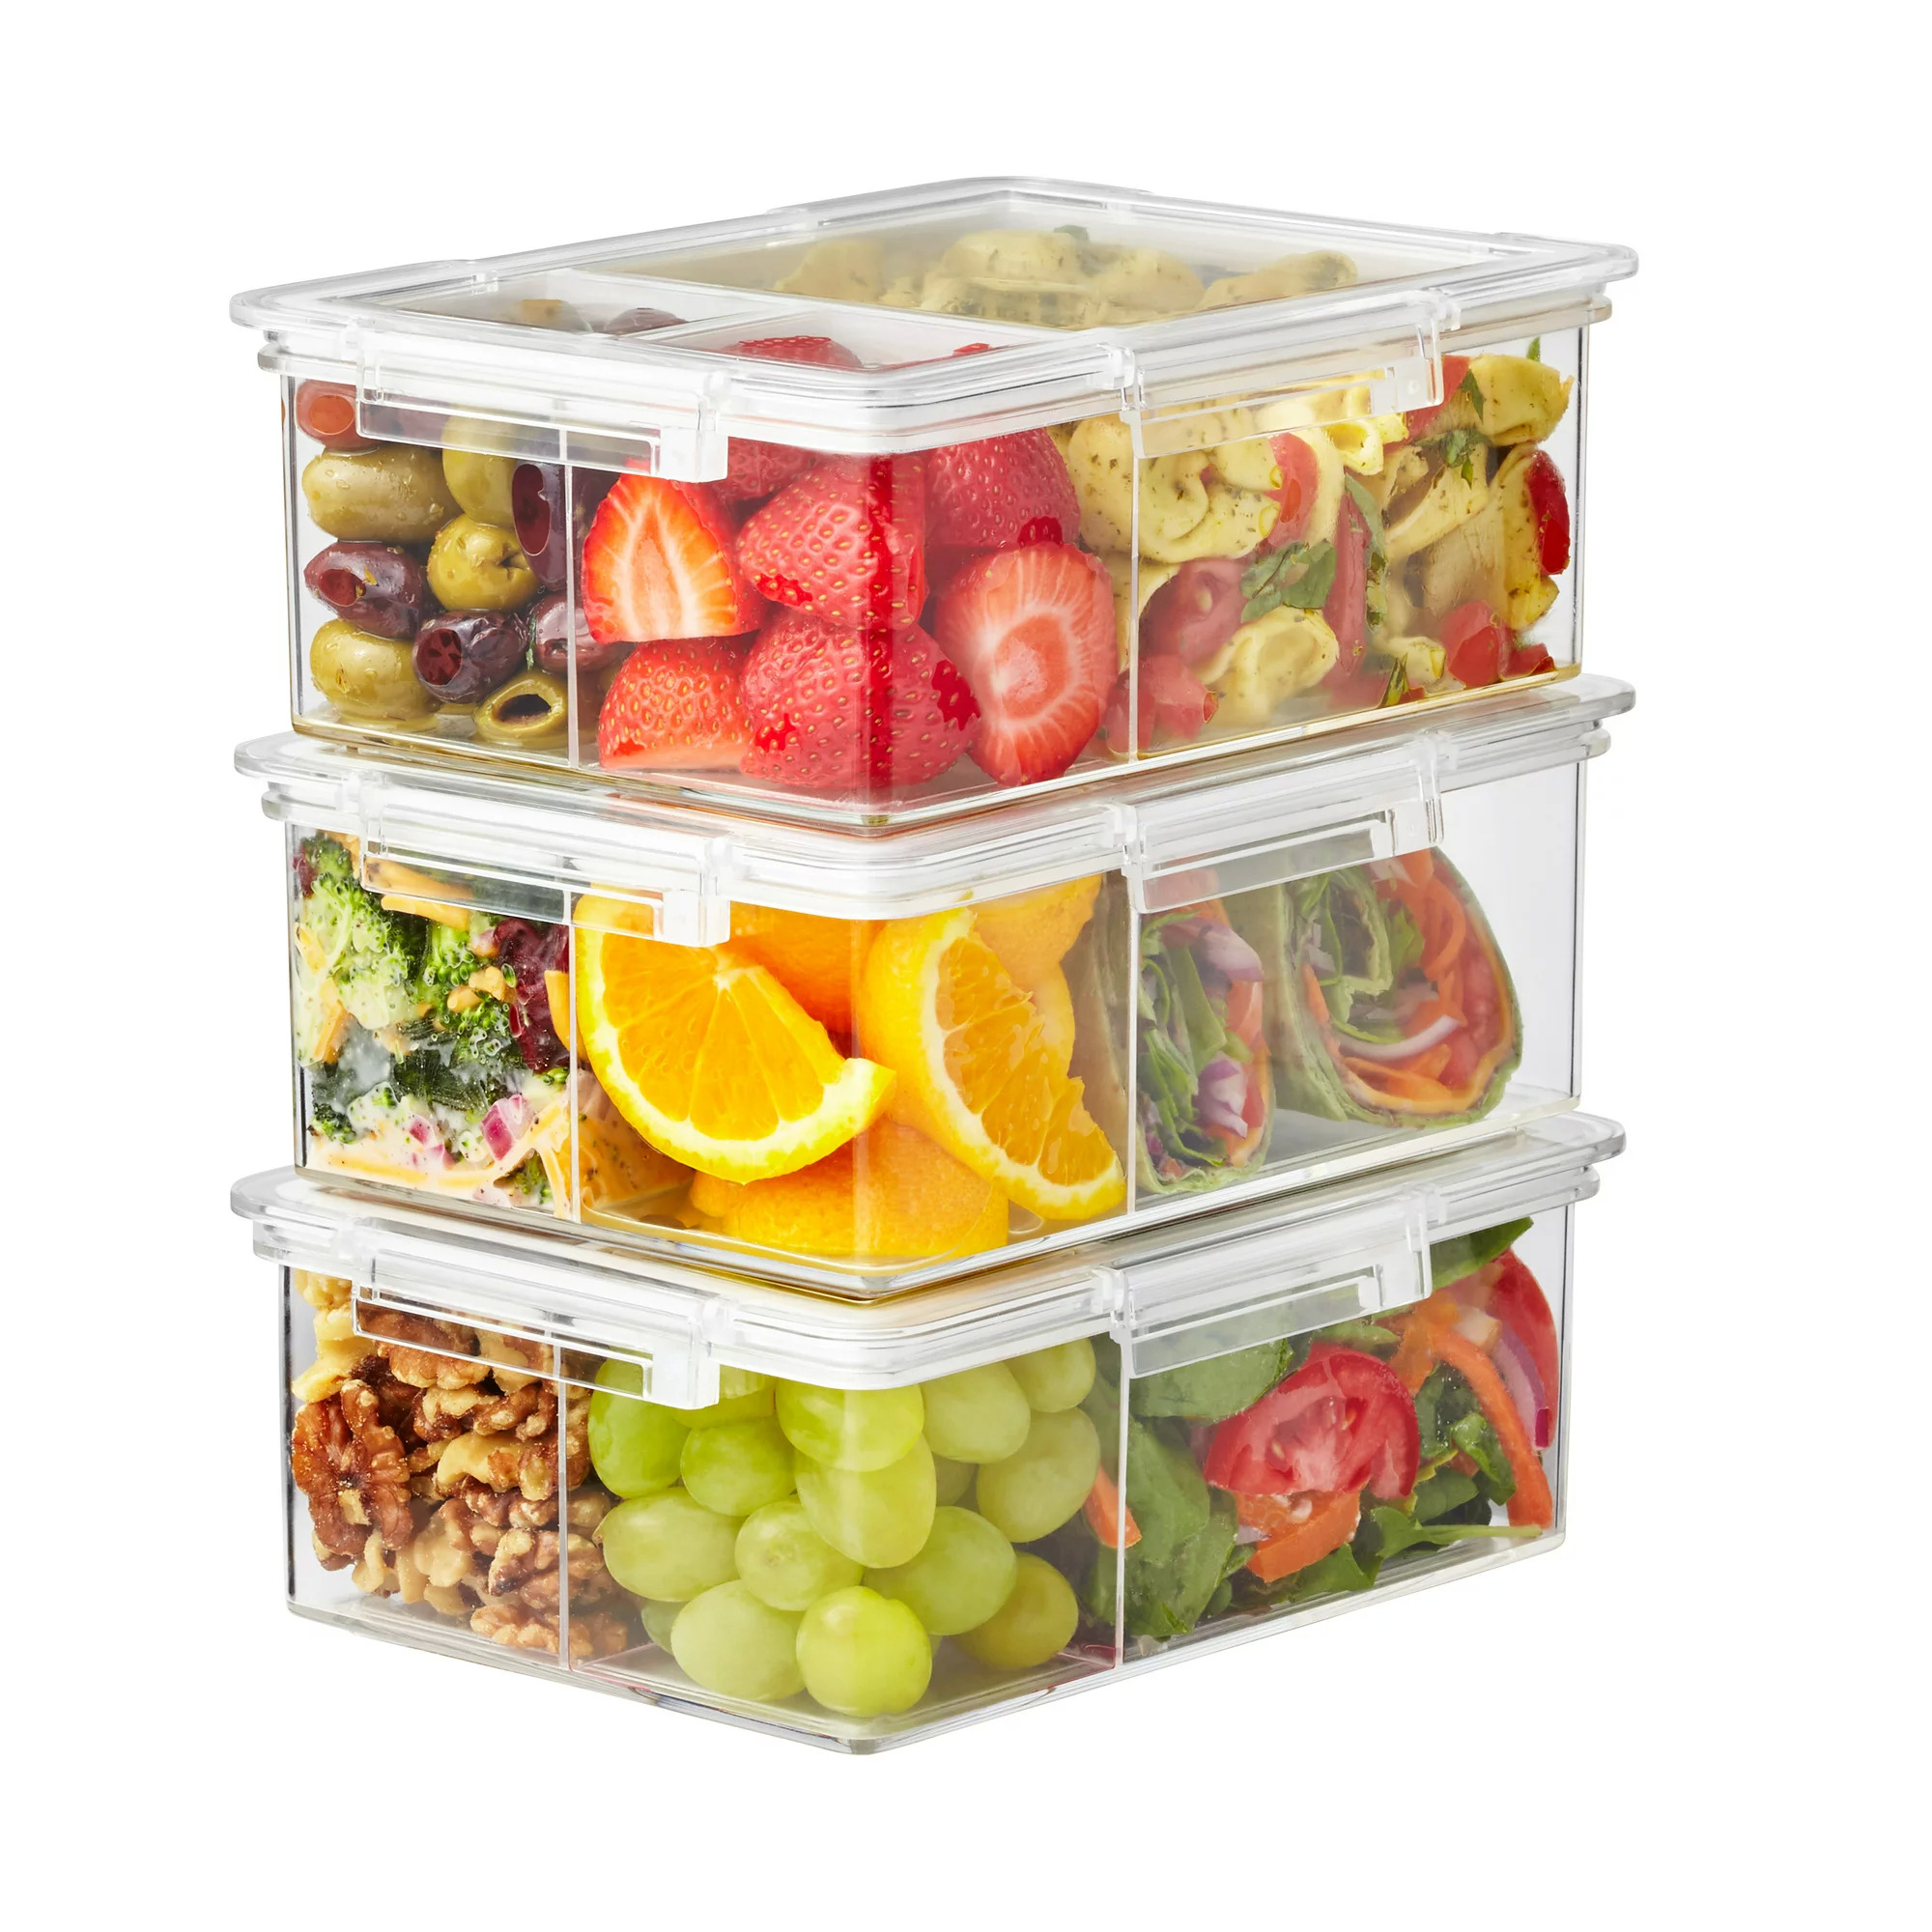 3-Pack The Home Edit Bento Box Food Storage Container $12 ($4 each) + Free S&H w/ Walmart+ or $35+